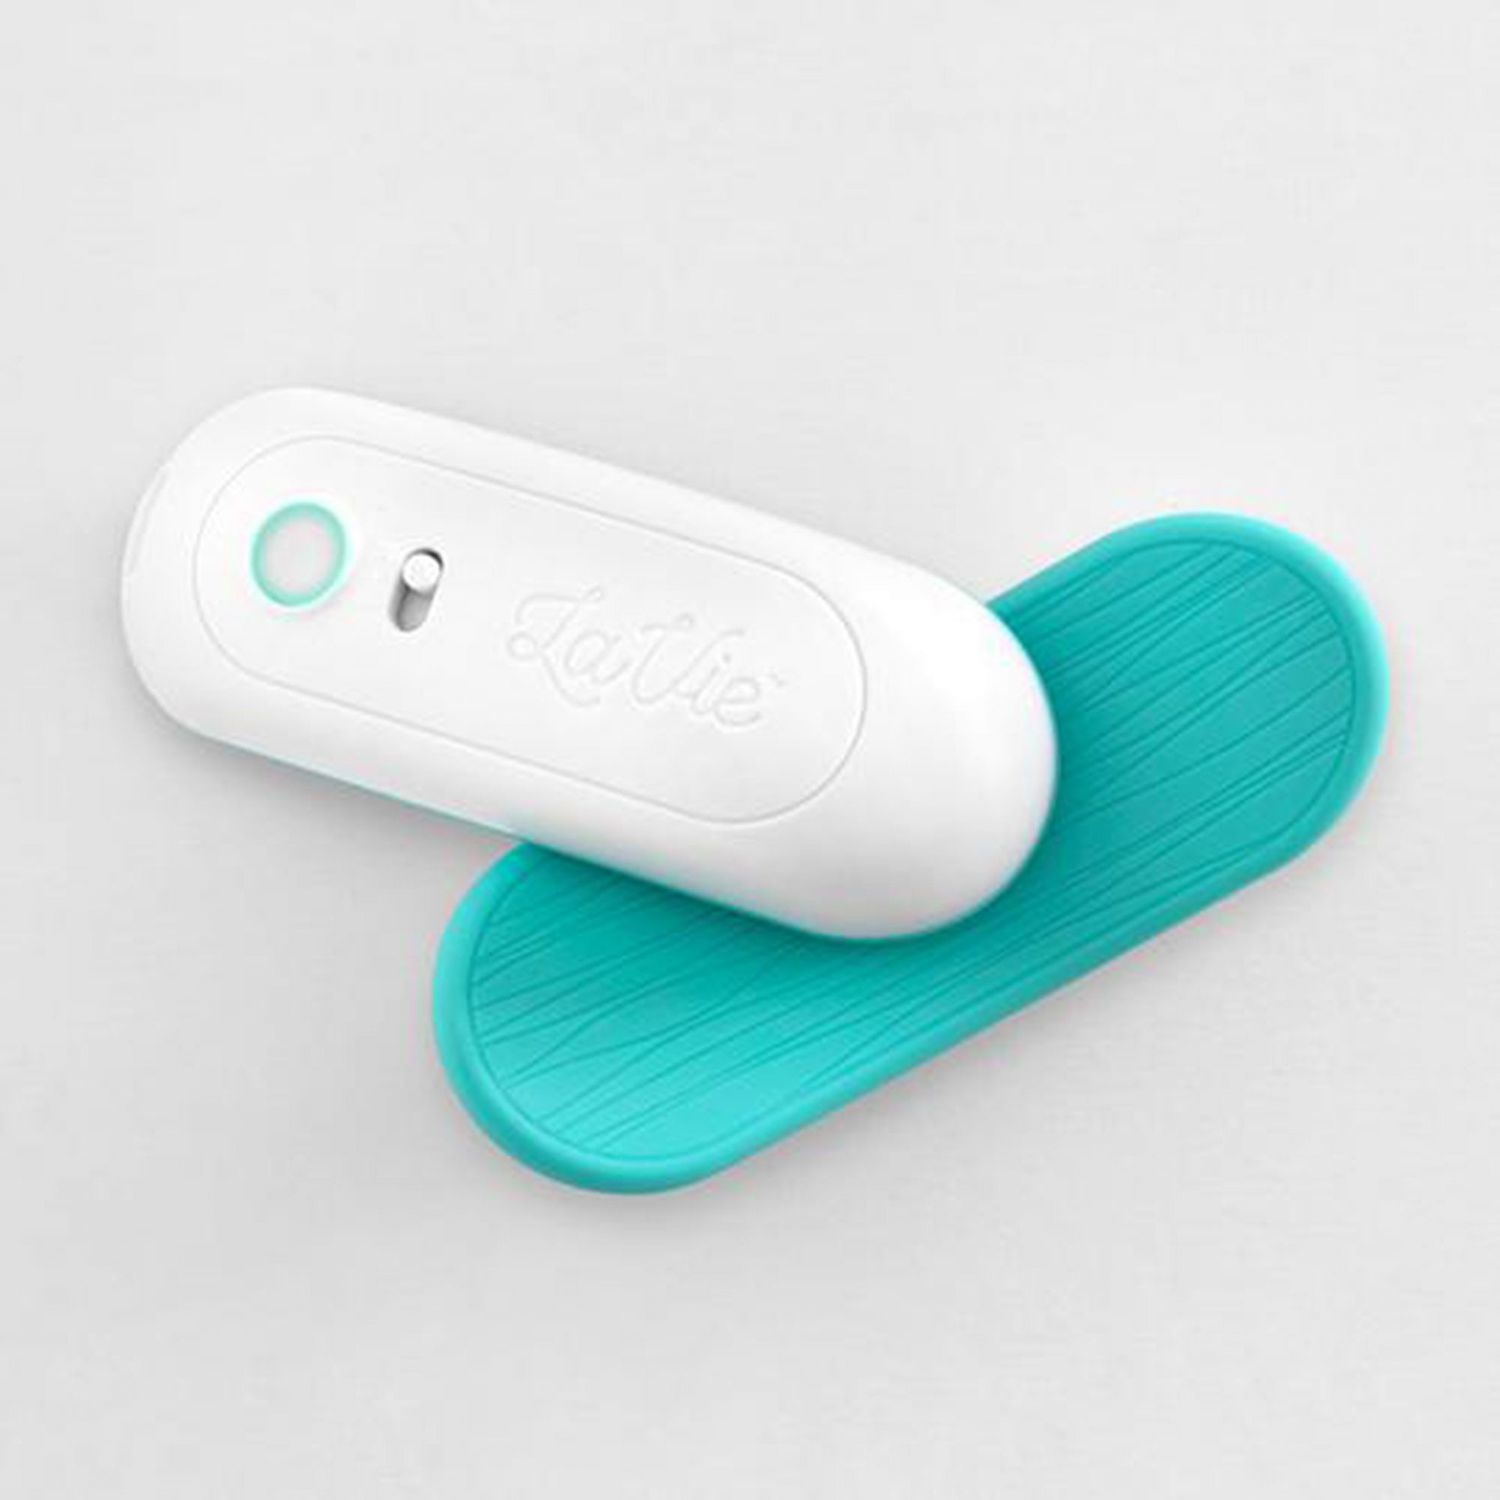 2-in-1 Lactation Massager – Frida - The fuss stops here.